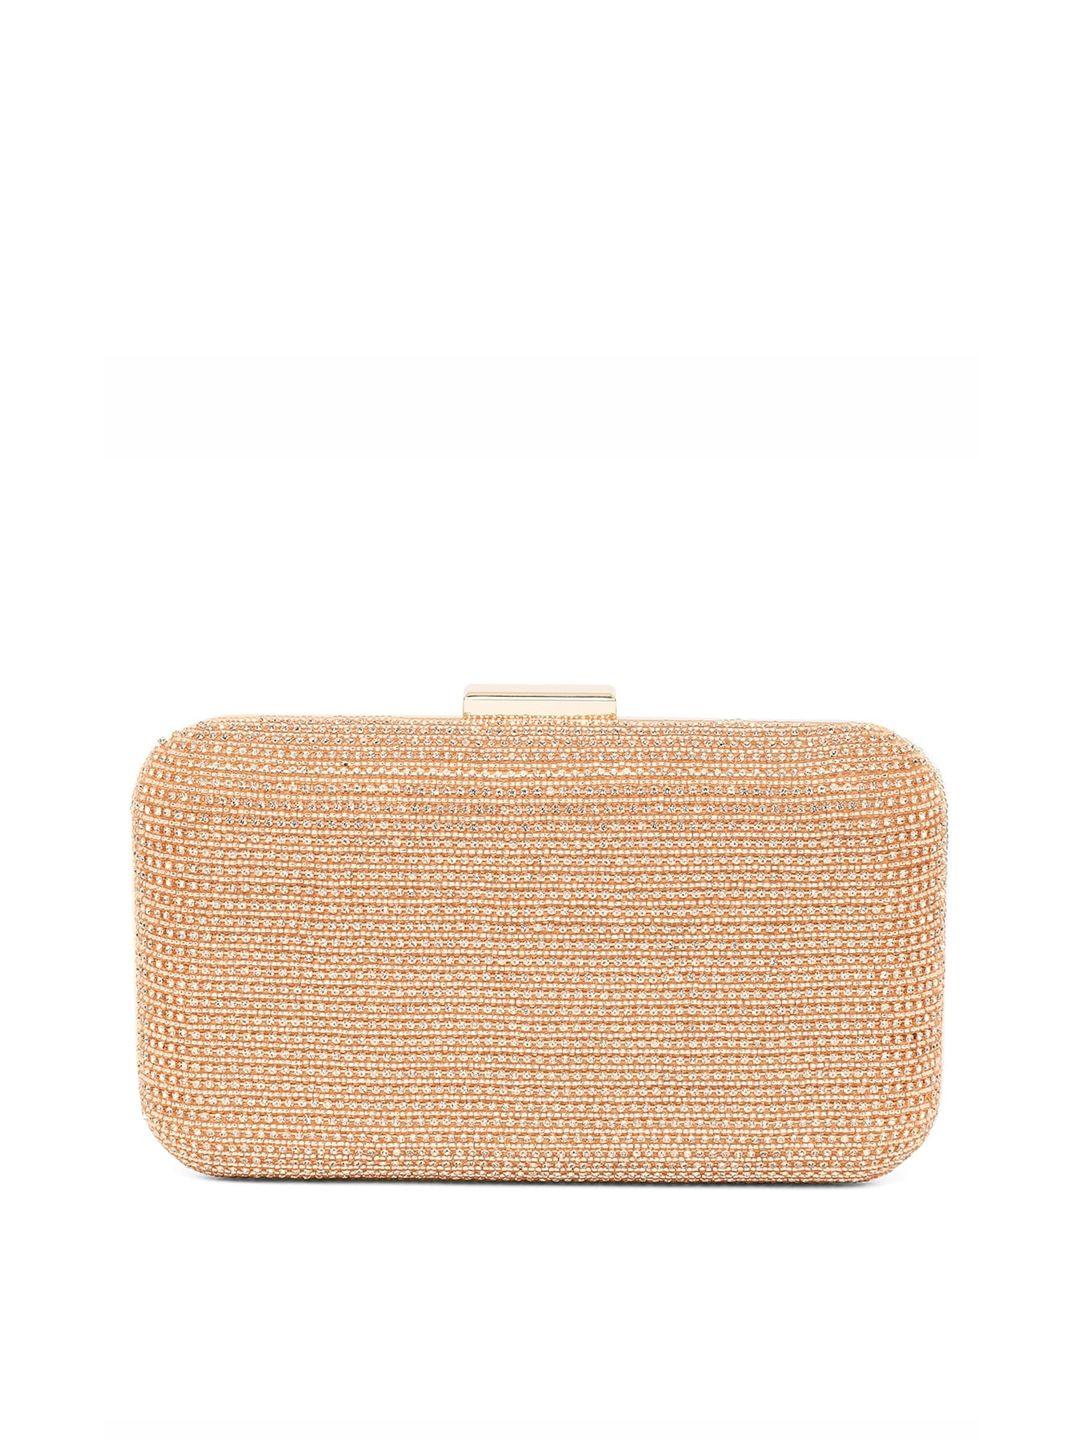 peora-women-rose-gold-clutches